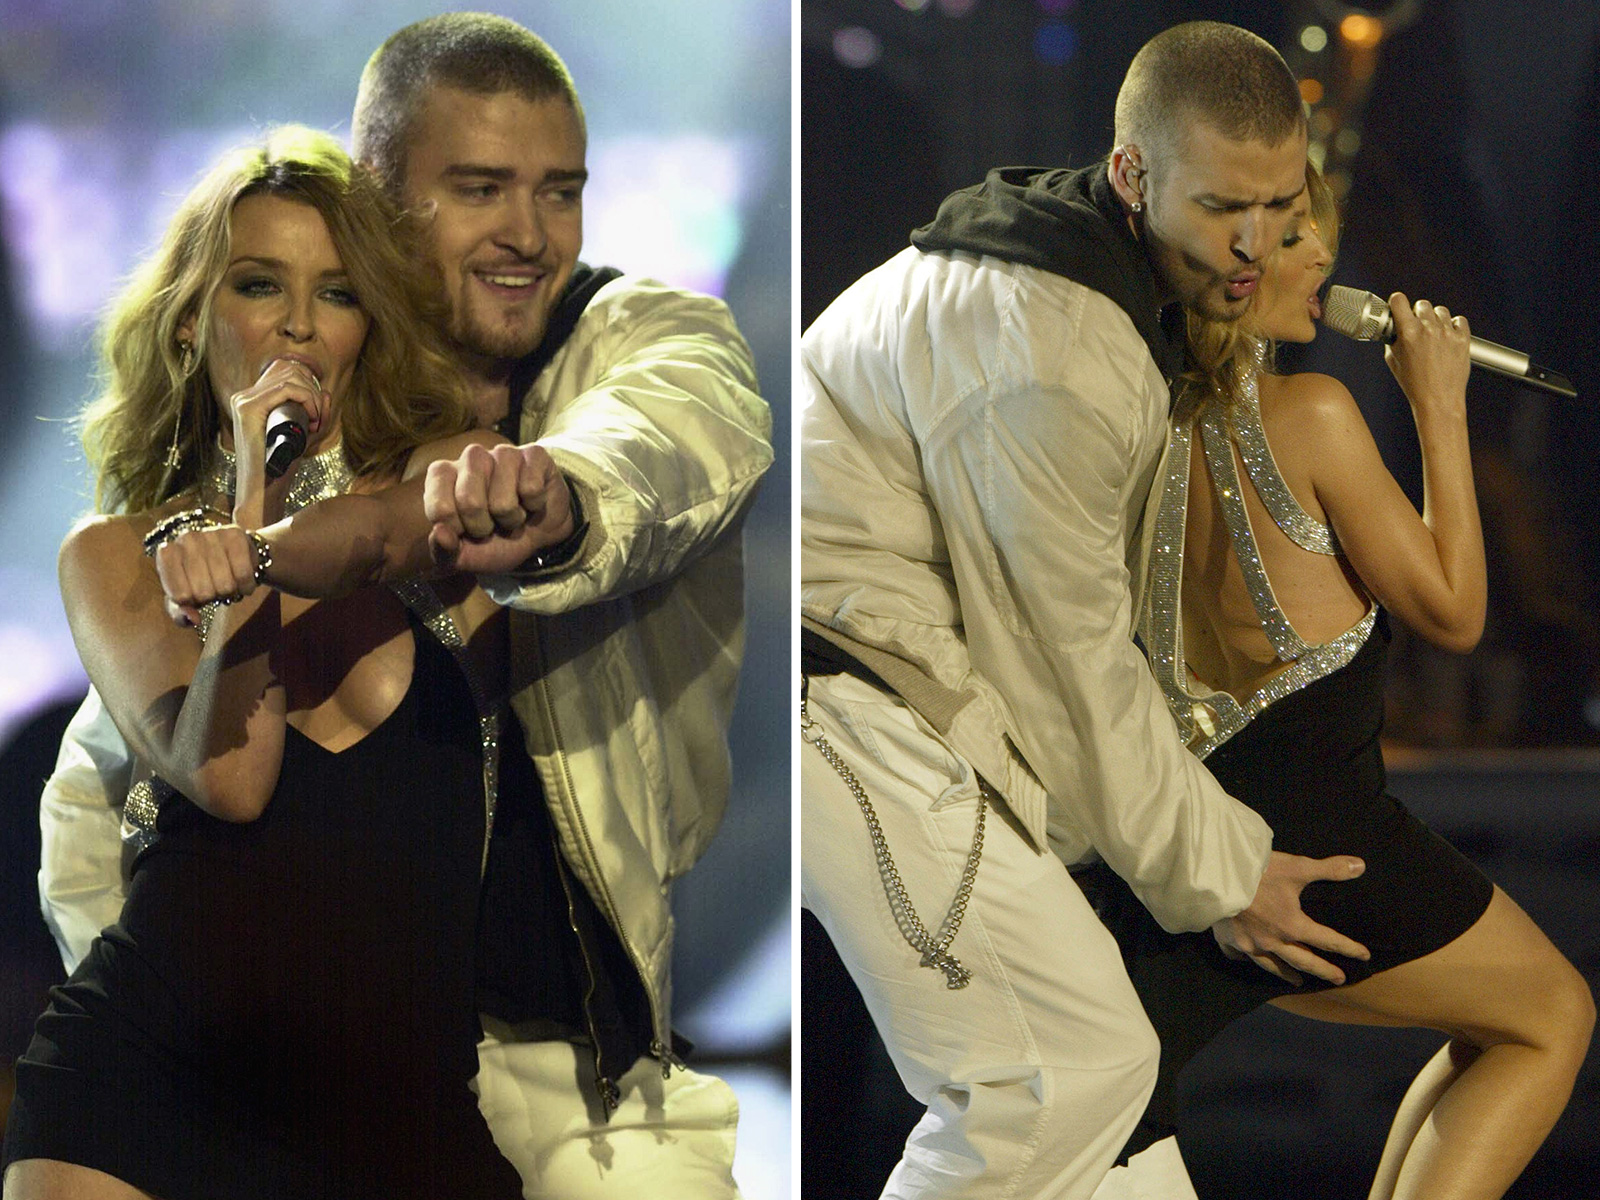 Justin Timberlake Grabs Kylie Minogues Butt in Old Clip, Fans Incensed